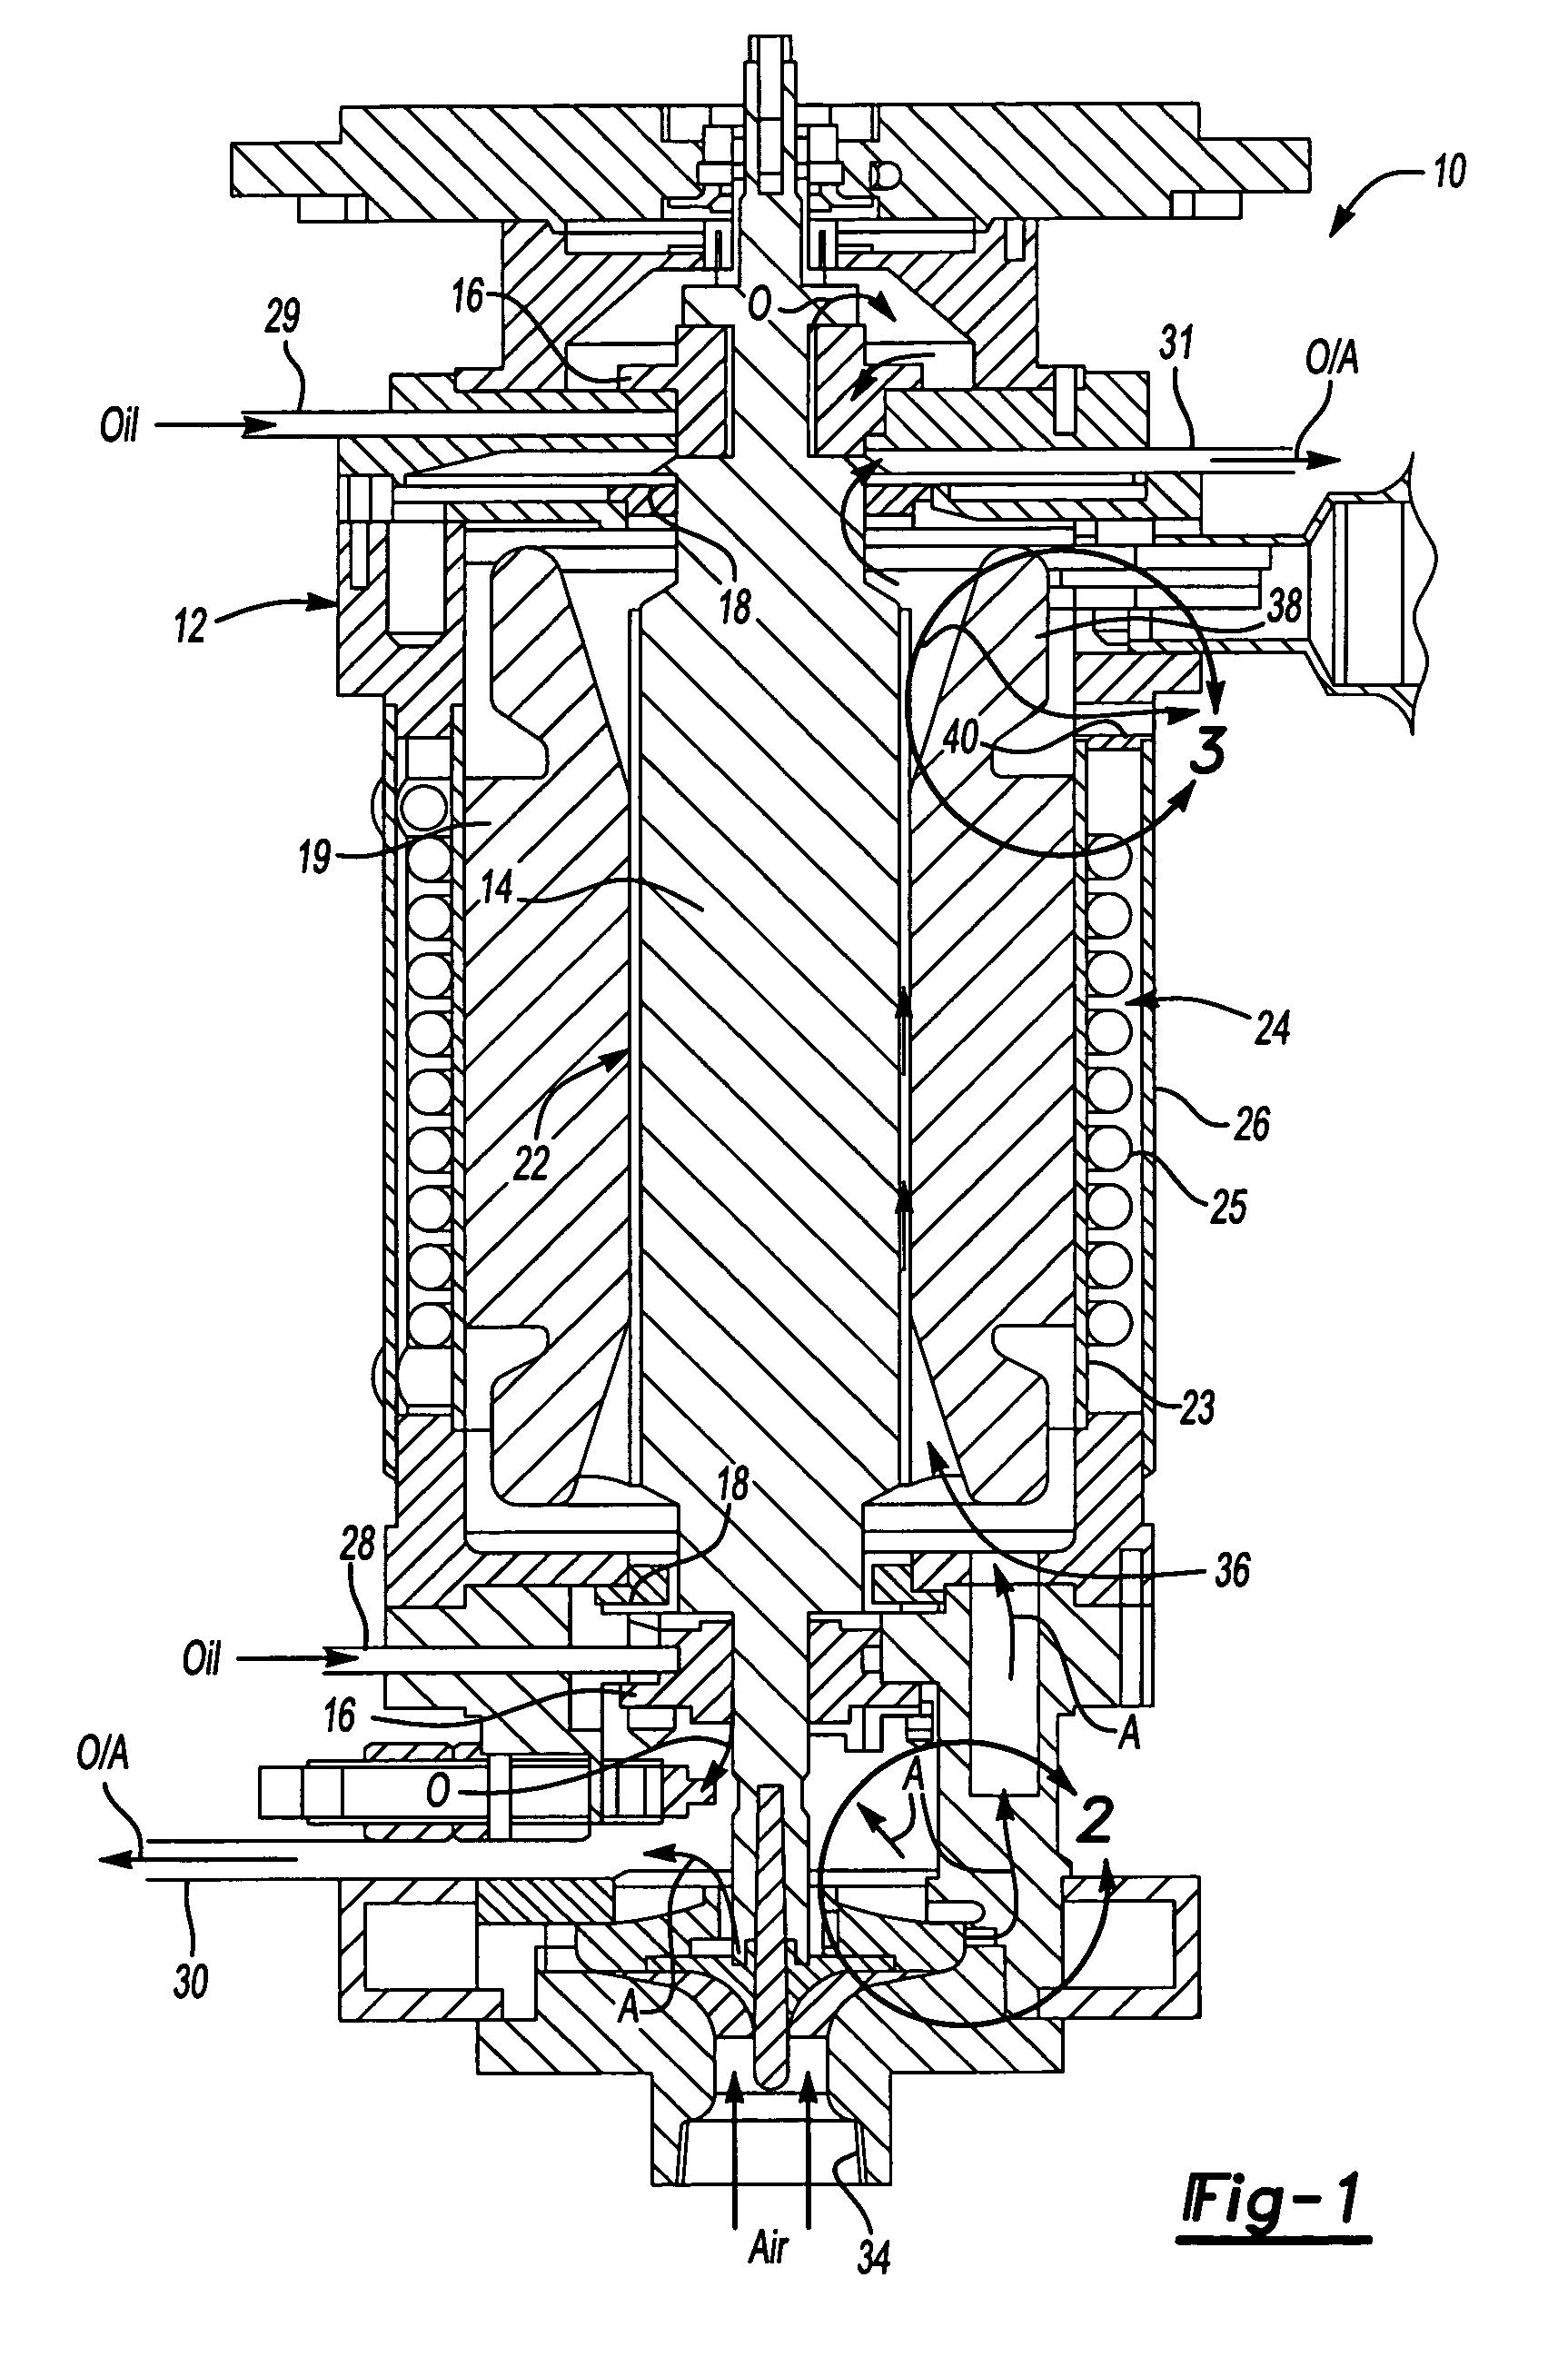 Rotary machine cooling system